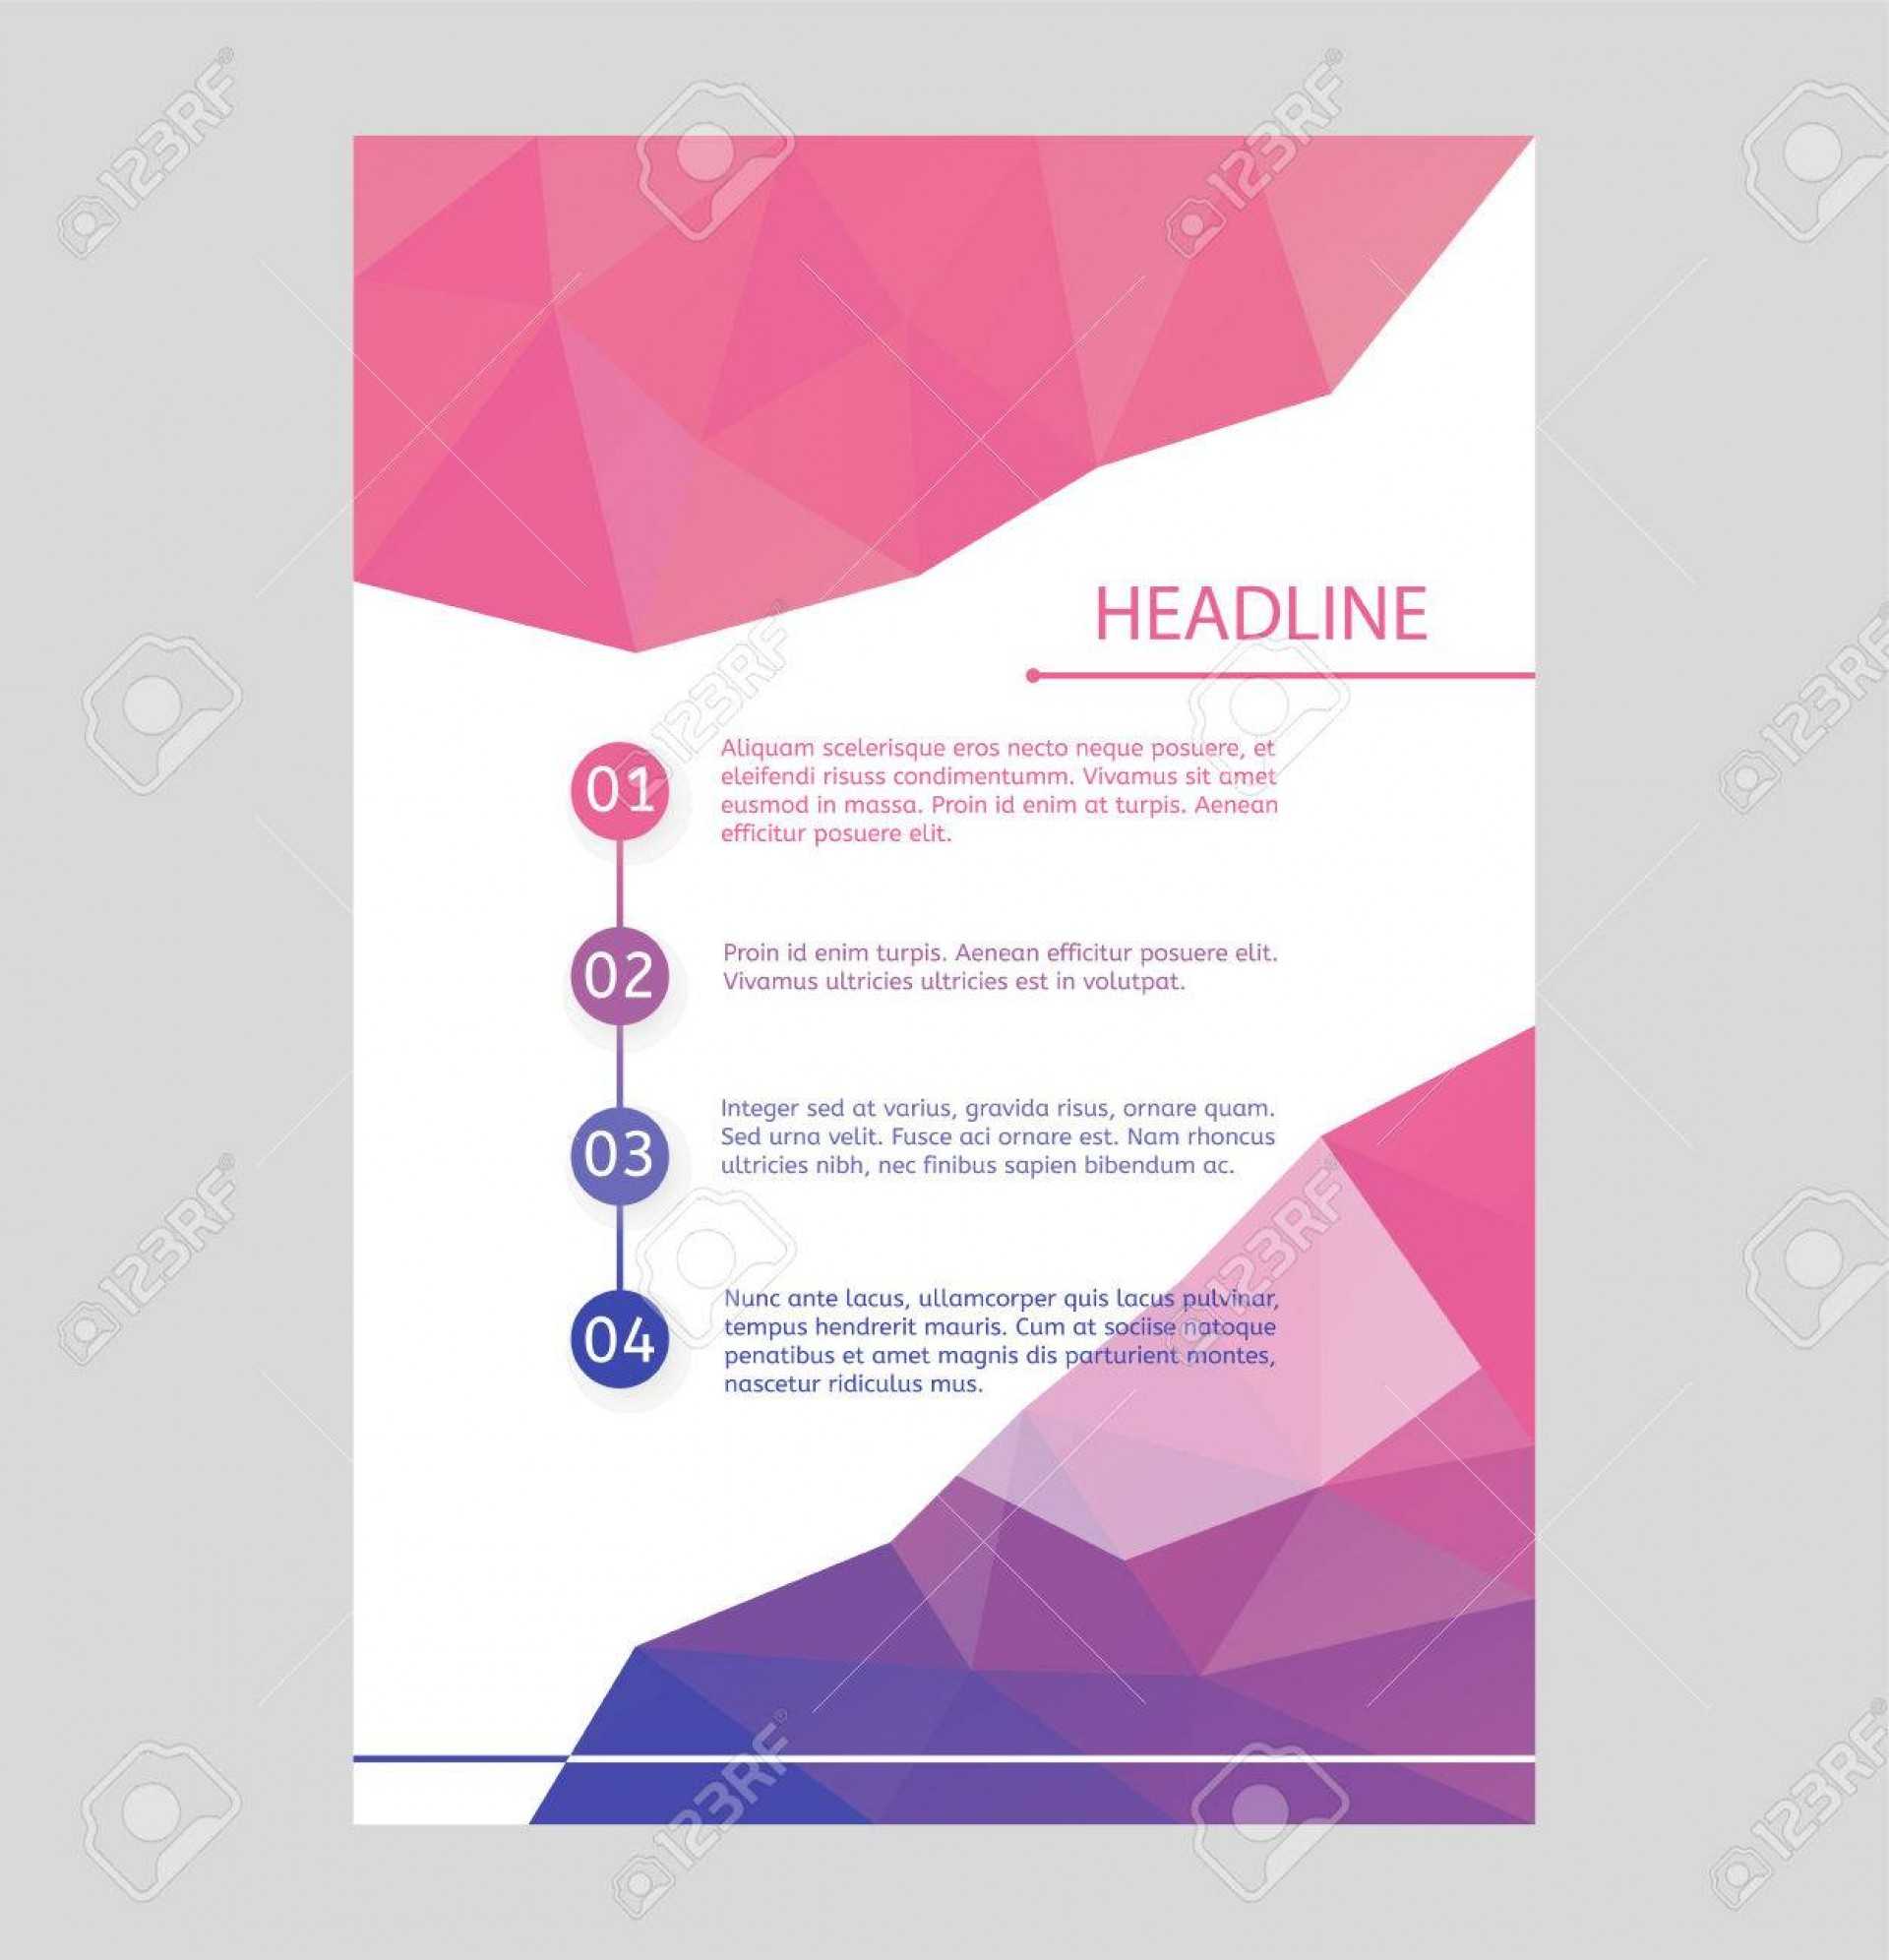 003 Free Blank Flyer Templates Template Unusual Ideas With Regard To Blank Templates For Flyers